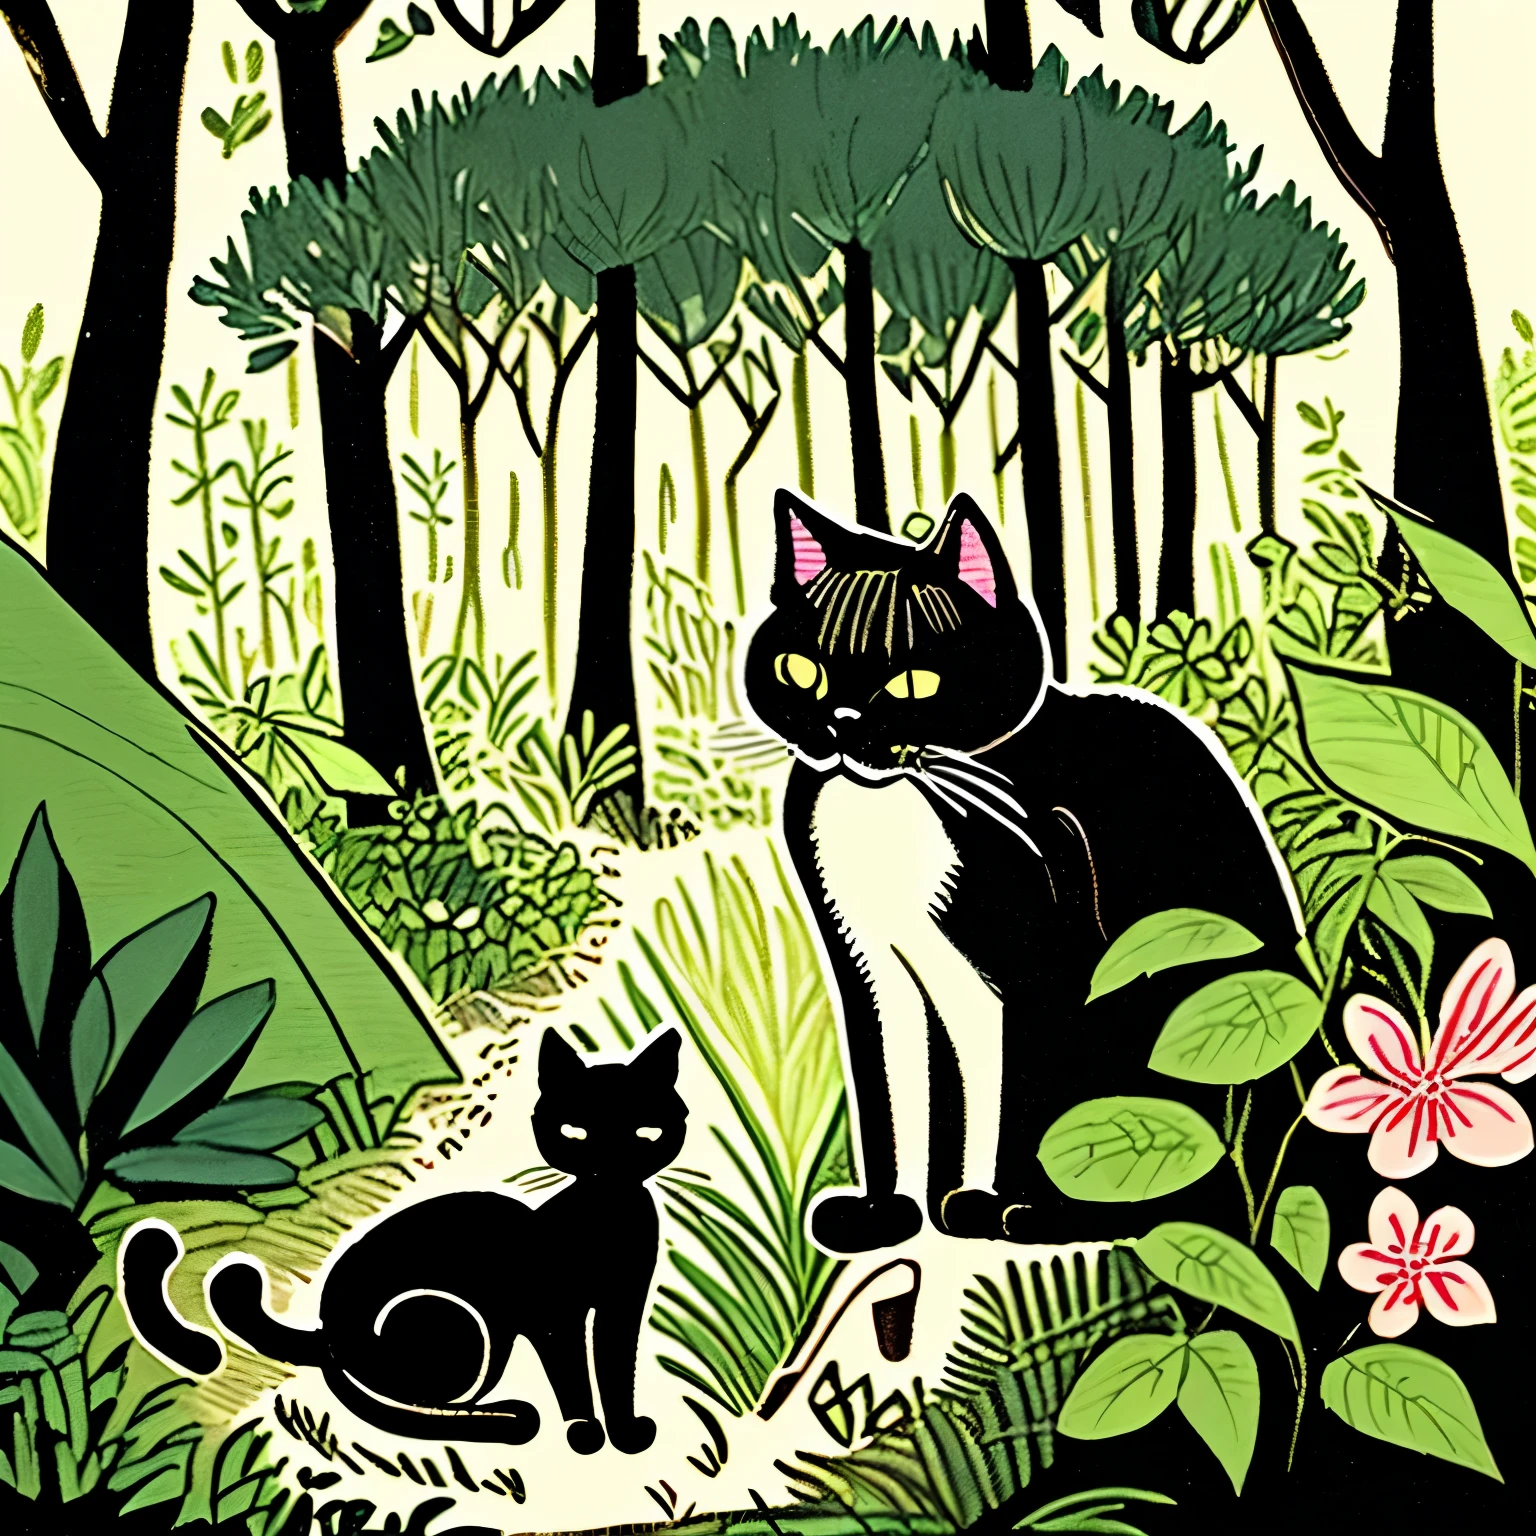 there is a black cat that is sitting in the bushes, cat in the forest, by André Beauneveu, by Ni Tian, beautiful illustration, by Yang J, jen bartel, by Eizan Kikukawa, 🌺 cgsociety, by Zofia Stryjenska, by Ni Duan, by Andrée Ruellan, by Jean Hélion